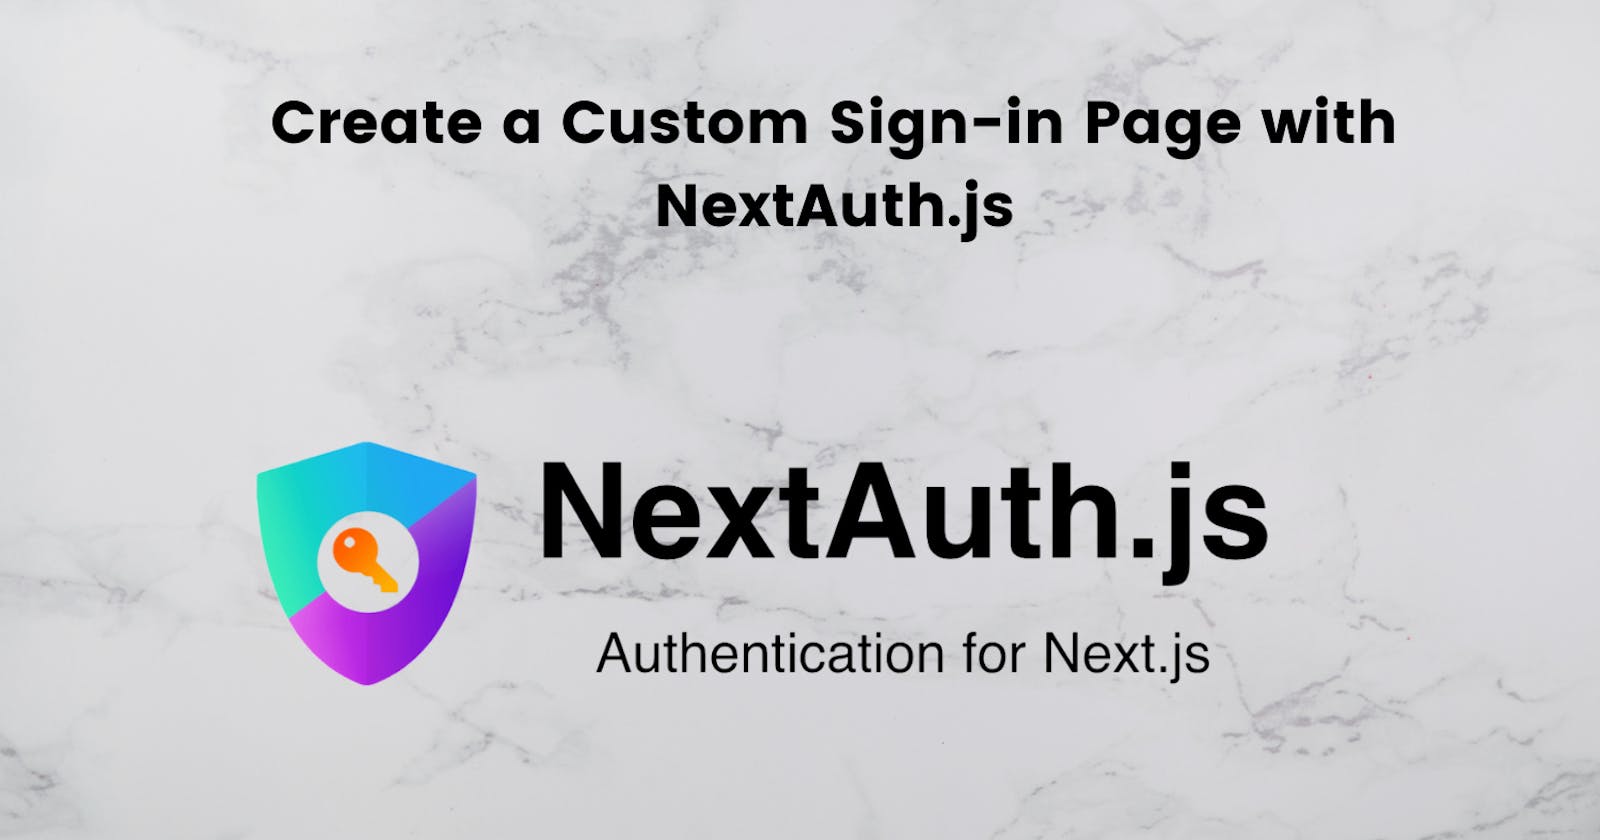 Create a Custom Sign-in Page with NextAuth.js